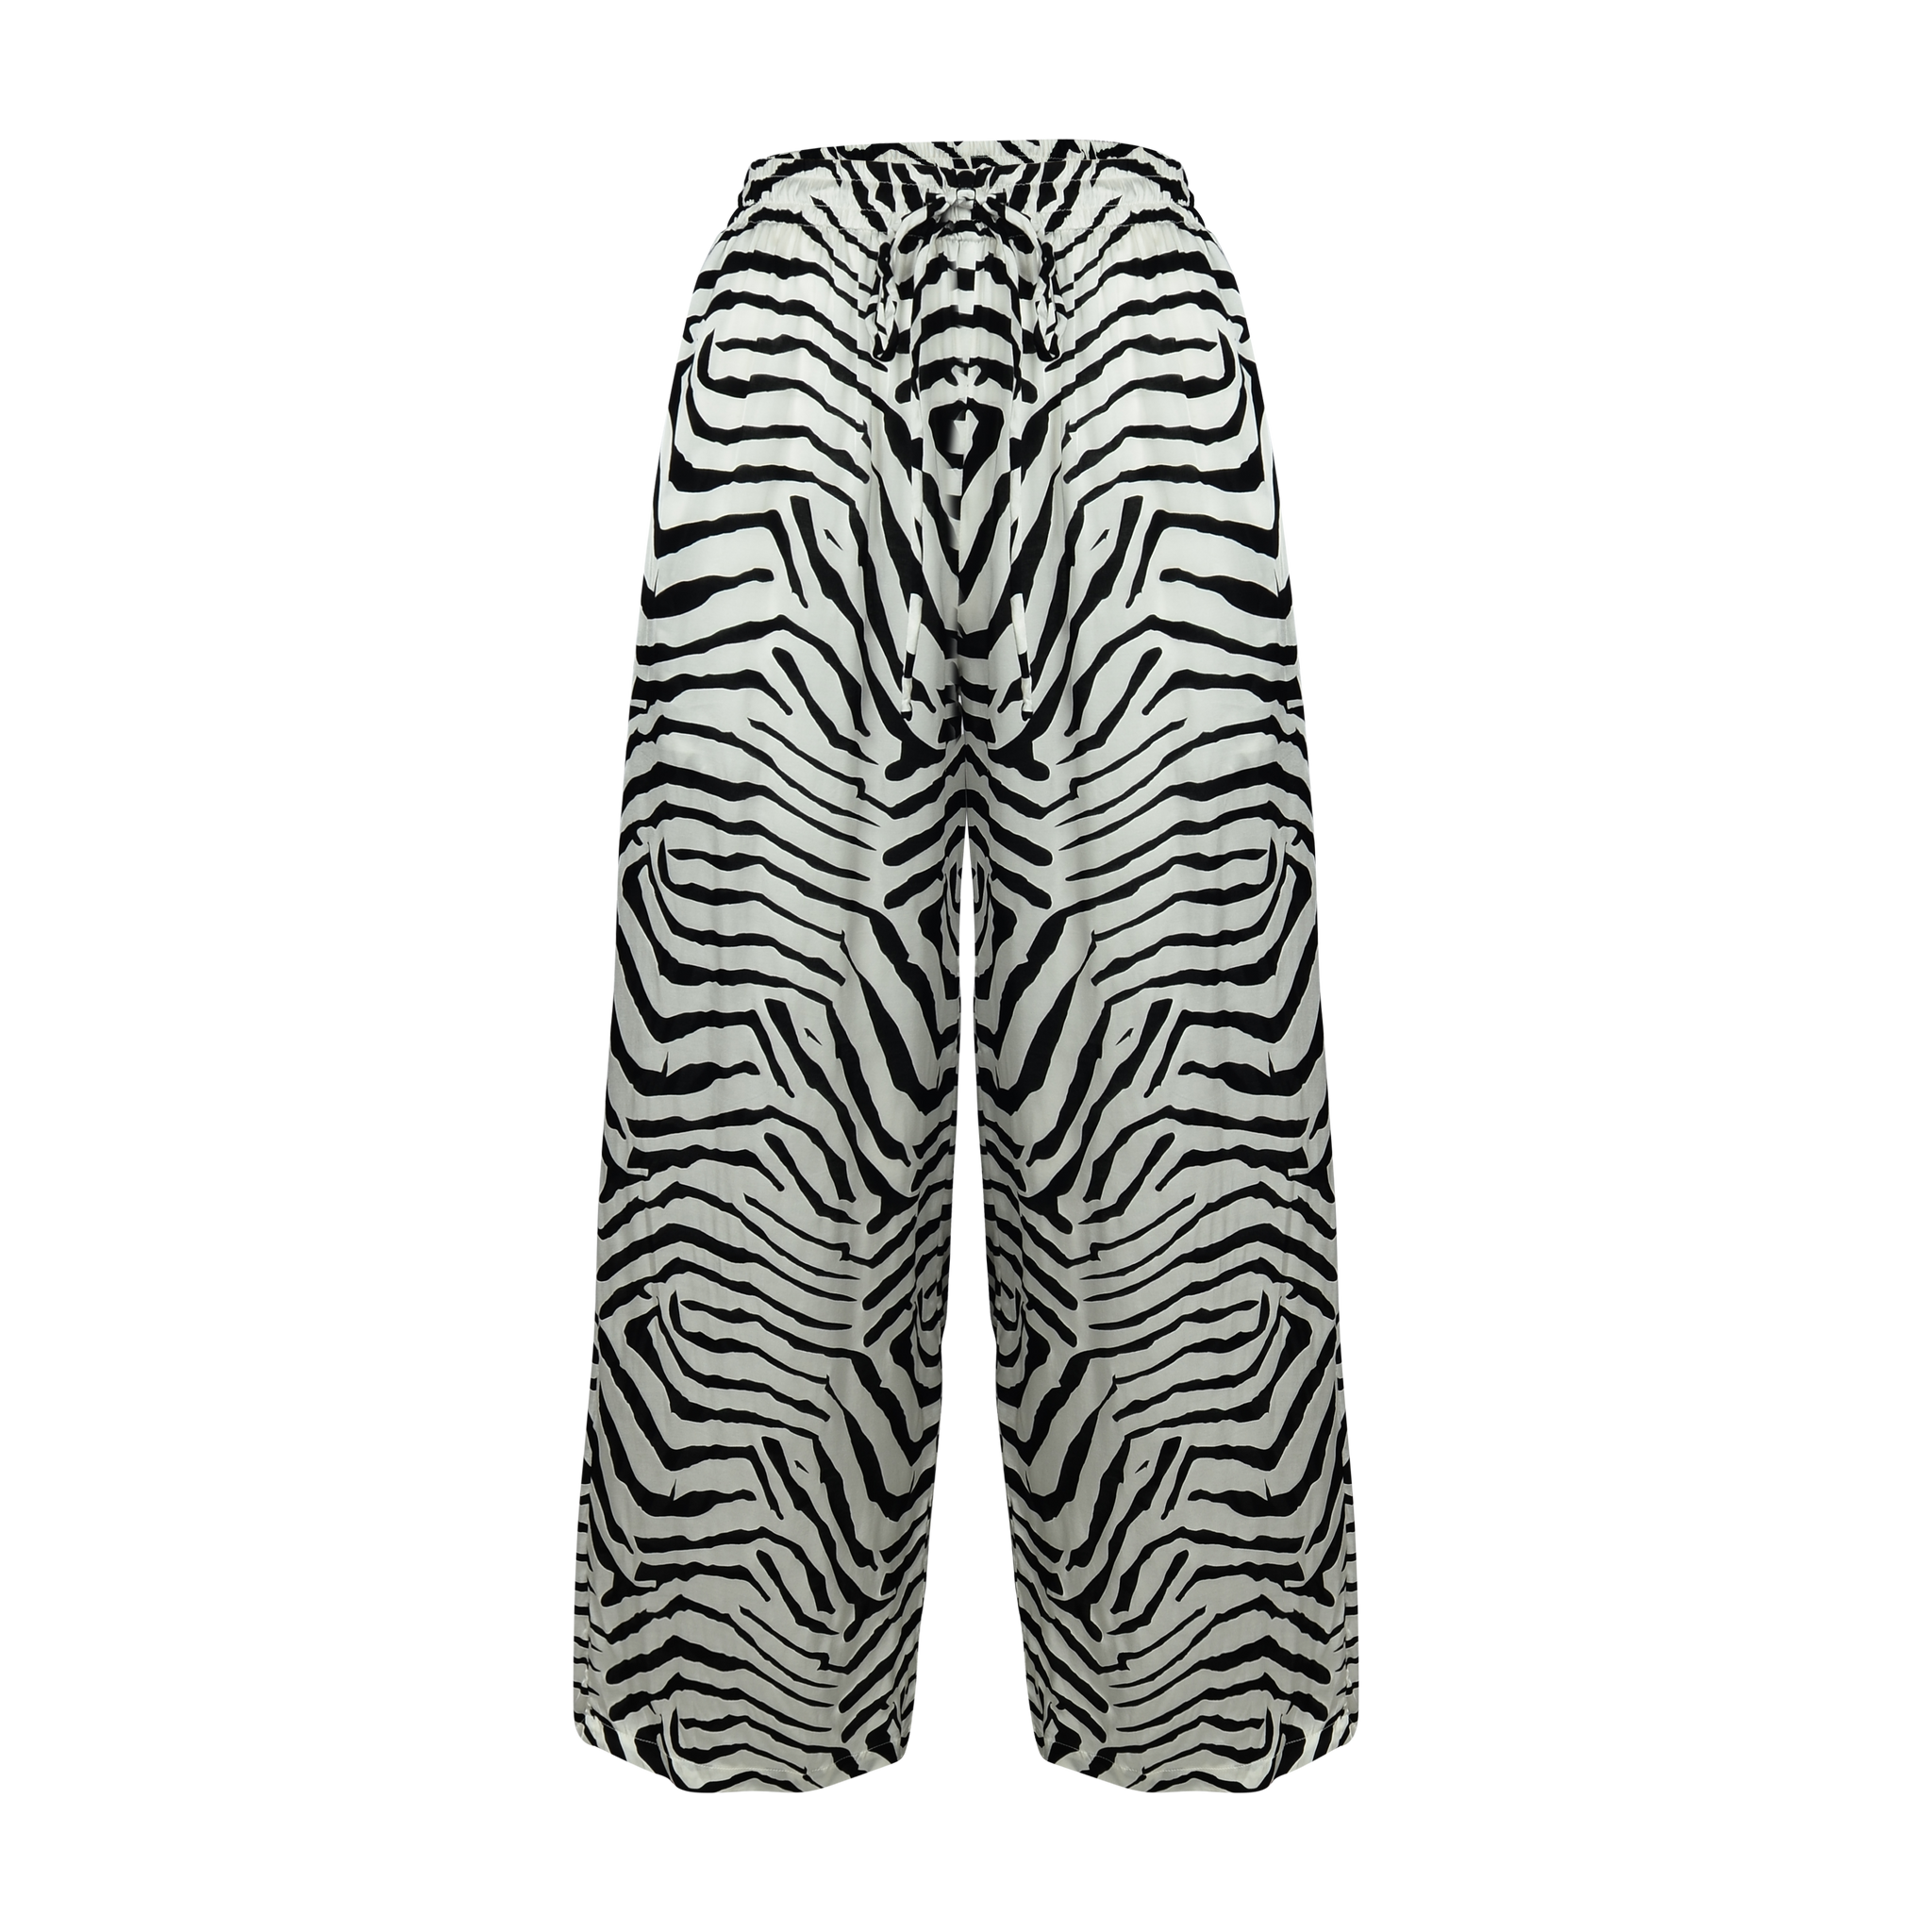 Luna Pants Tiger Print - Pants THIS IS A LOVE SONG